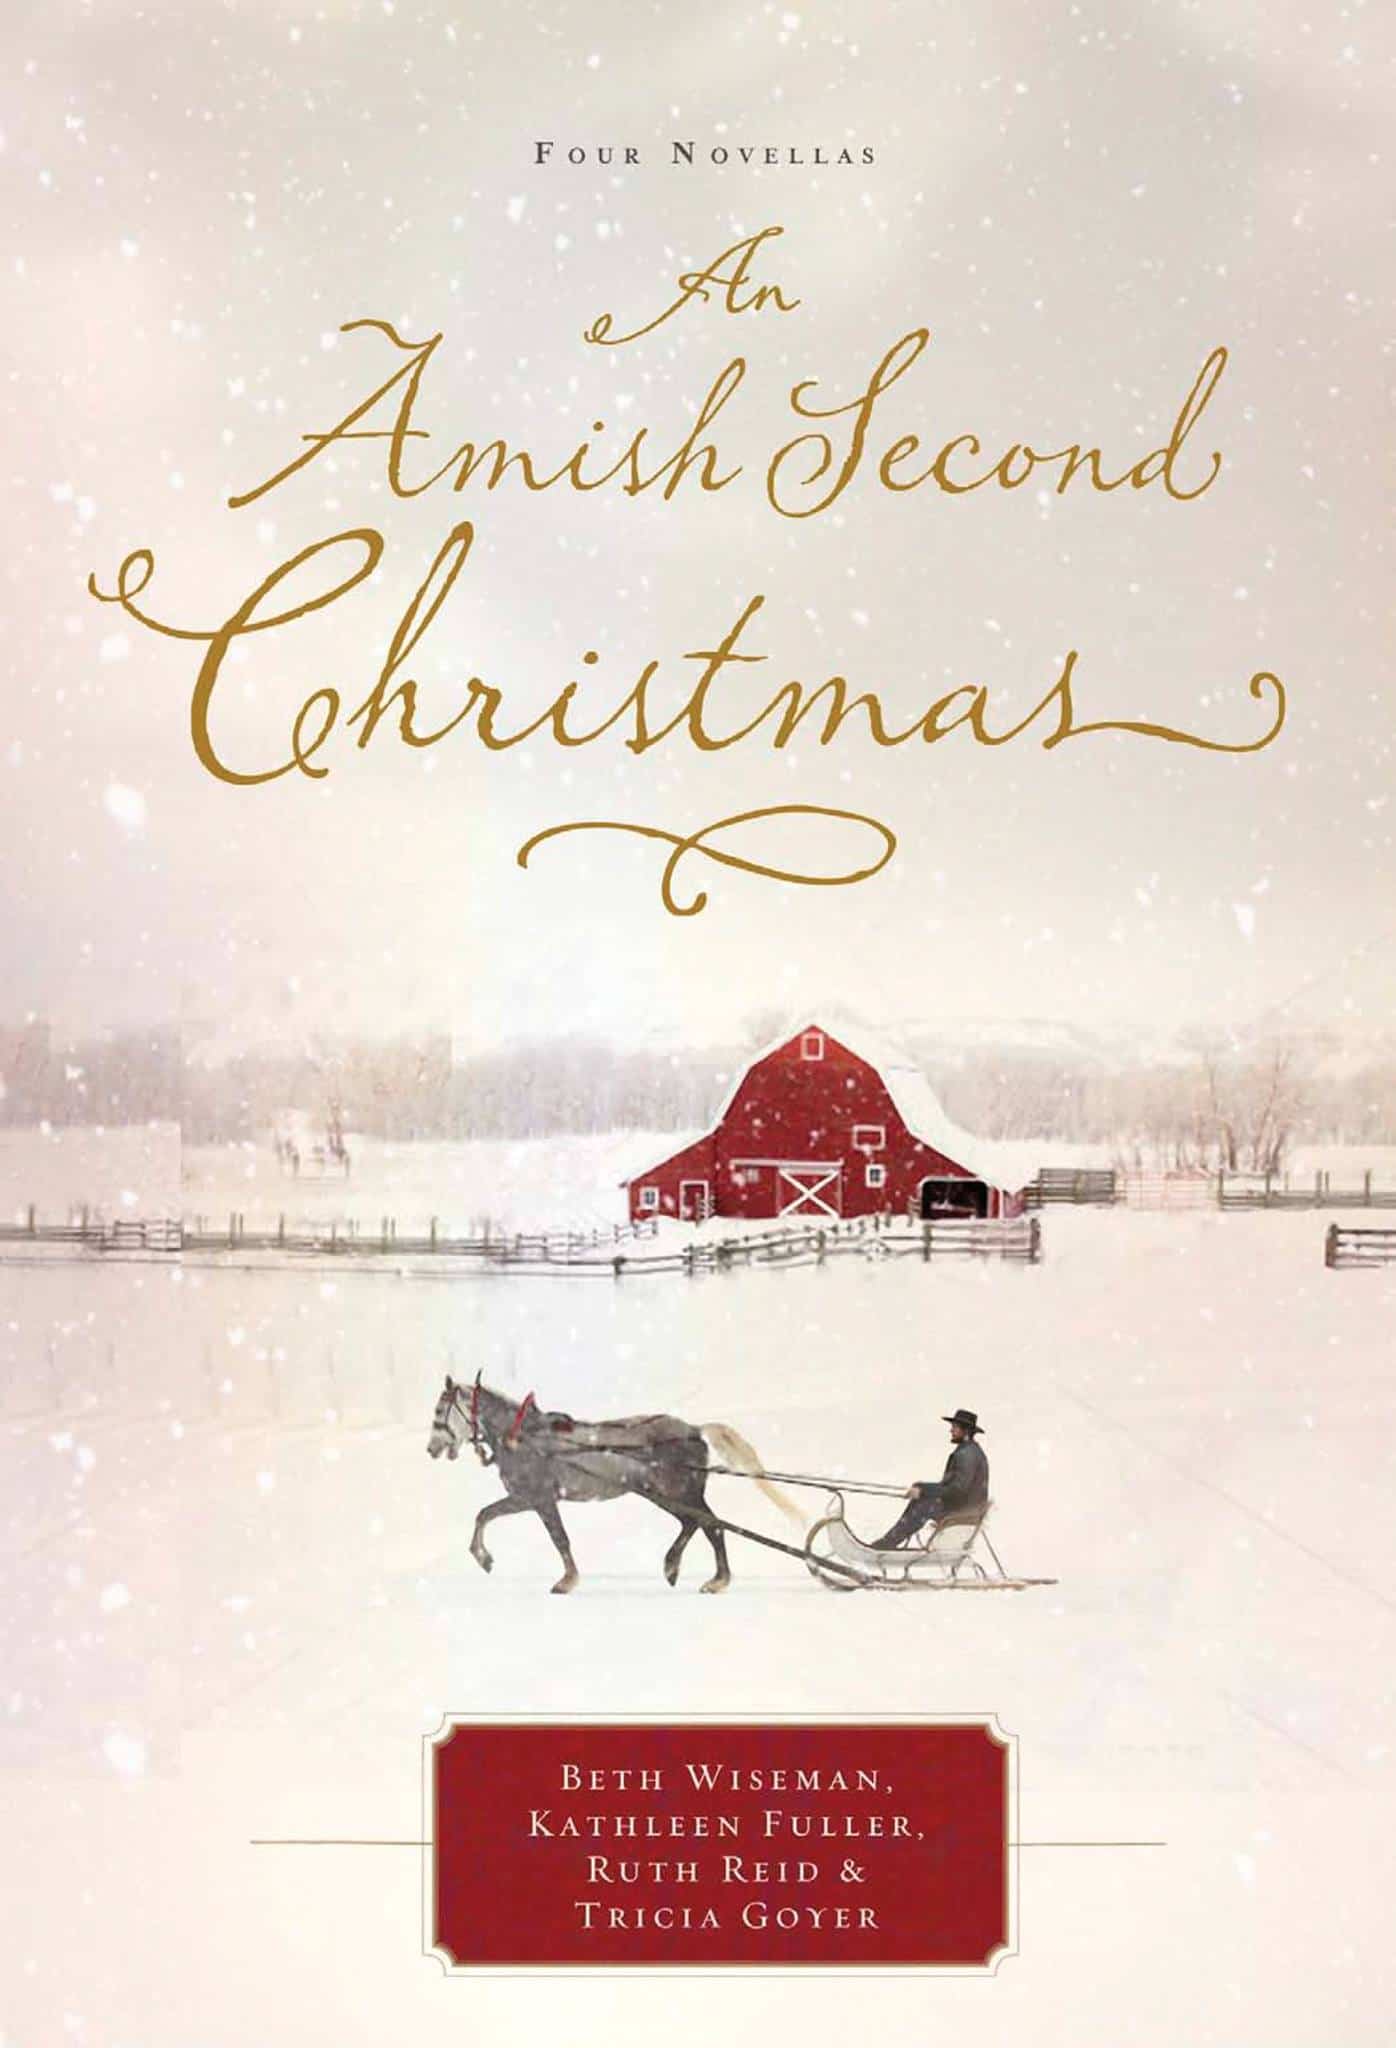 An Amish Second Christmas Book Review